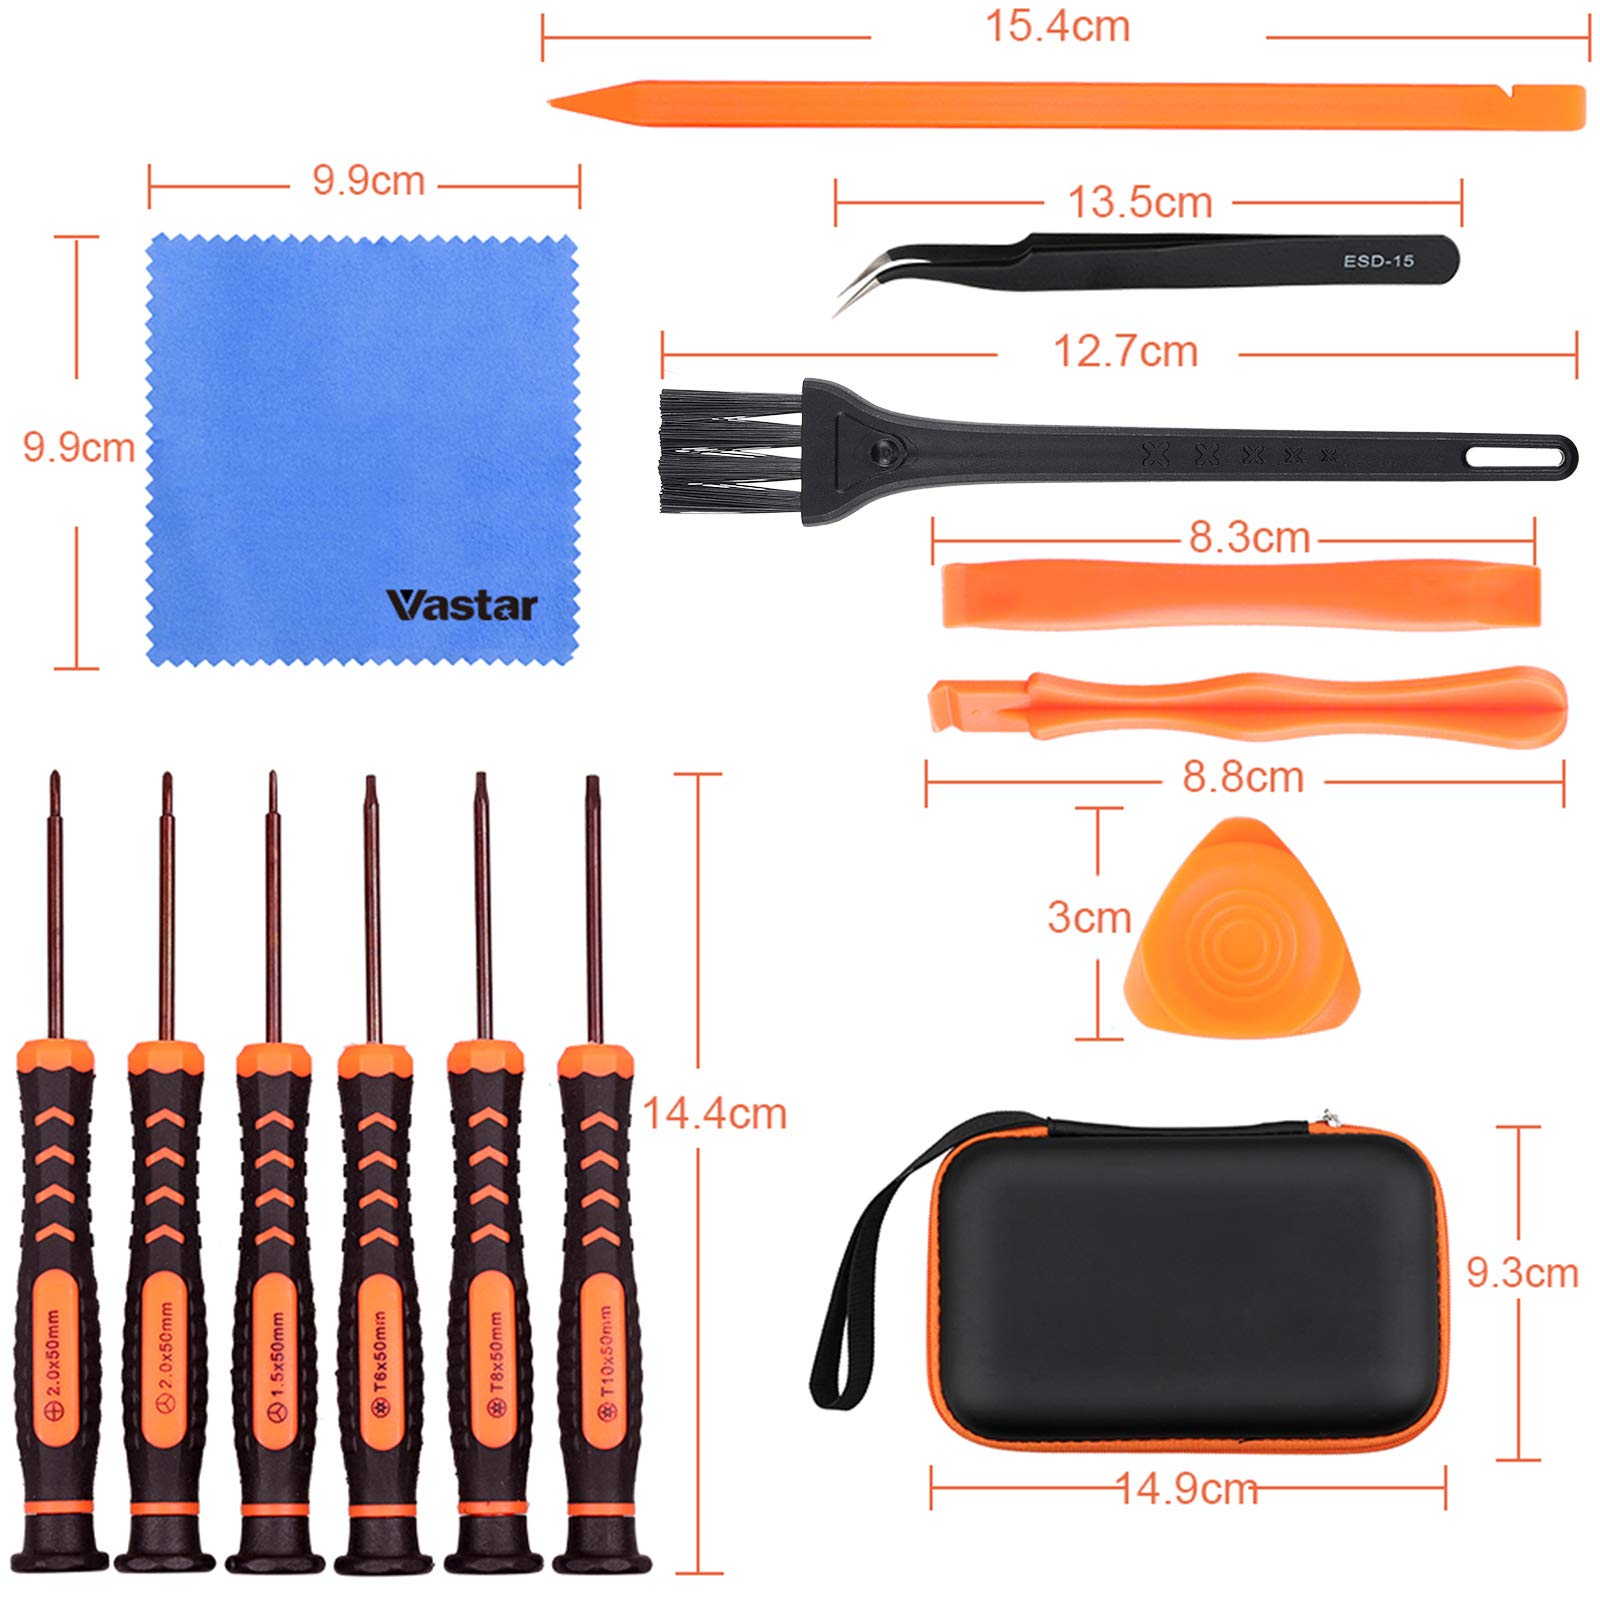 Vastar 17Pcs Triwing Screwdriver Set for Nintendo - Full Professional Screwdriver Bit Repair Tool Kit with S2 Steel for Nintendo New 3DS/2DS XL/NES/SNES Classic (2017)/Nintendo NDS/NDS